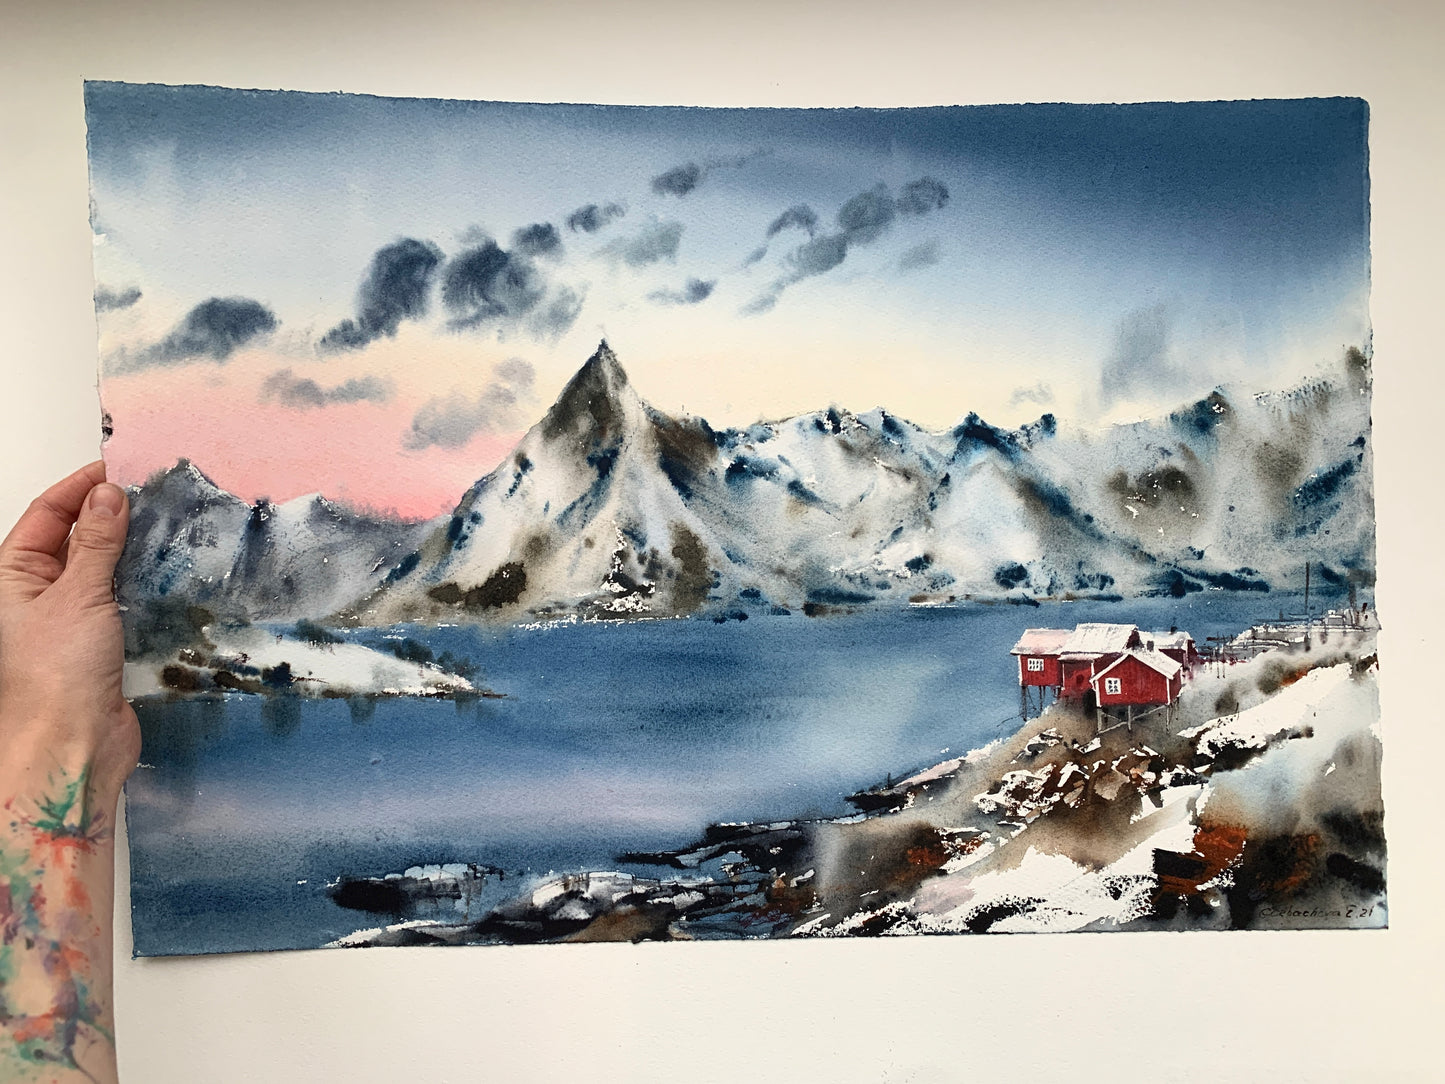 Lofoten Islands Watercolor Painting Original - Red house in the fjords - 22x15 in